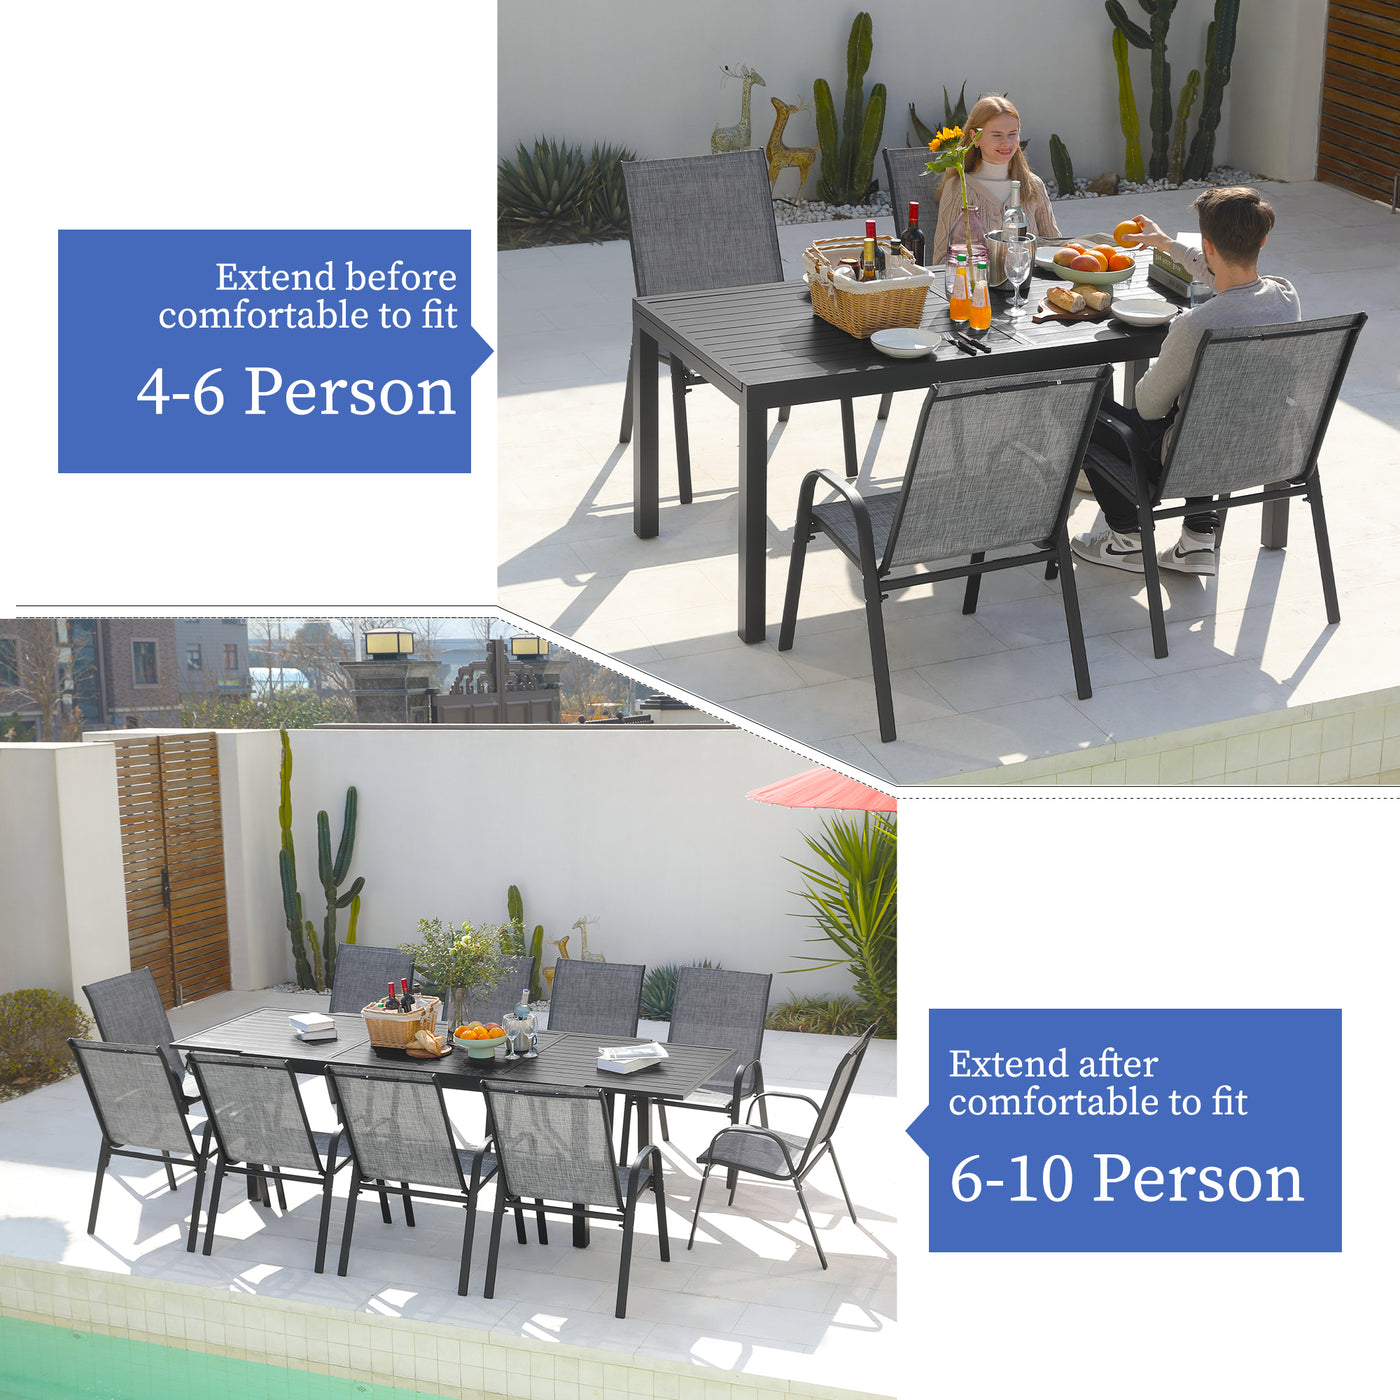 Outdoor patio dining set with extension feature, showcasing seating arrangements for 4-6 and 6-10 people, including a Pizzello Aluminum Patio Extendable Dining Table.